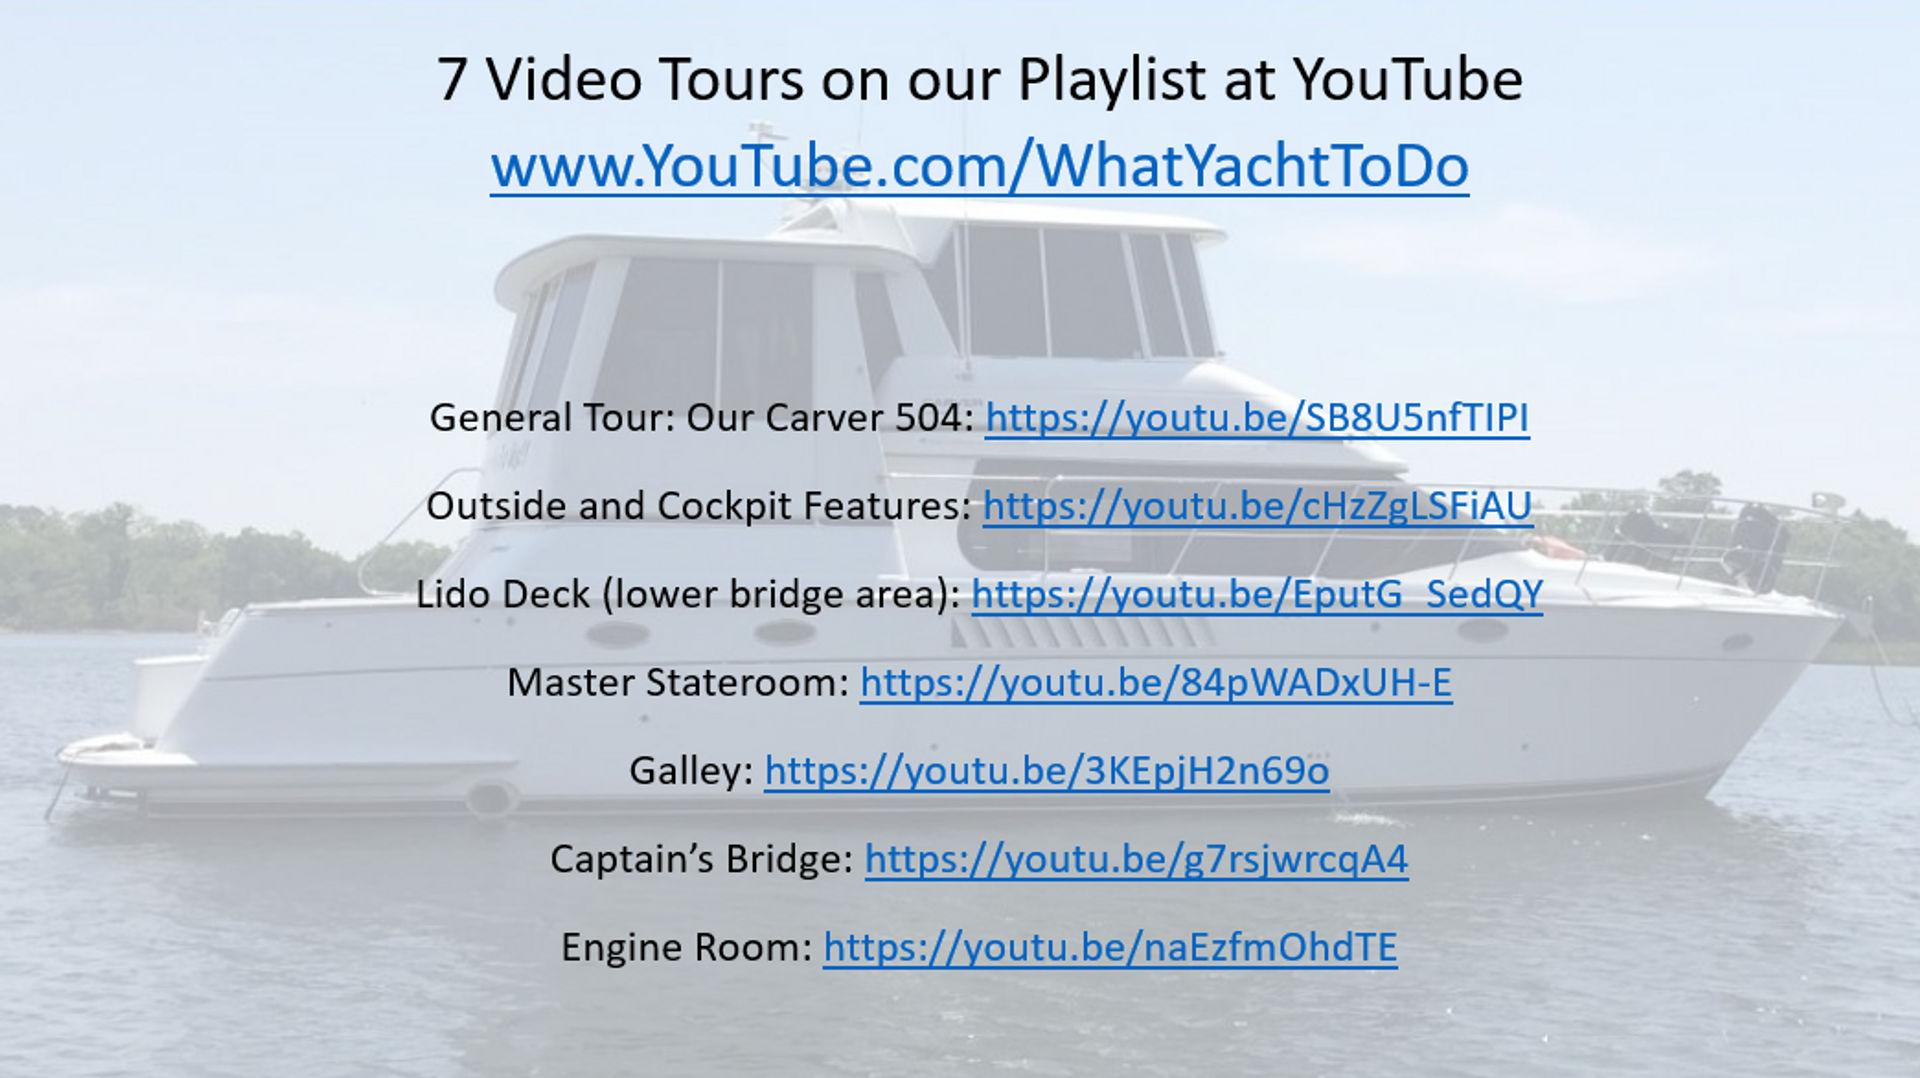 www.WhatYachtToDo.com for more information & sign up for our newsletter. Tour Playlist: https://youtube.com/playlist?list=PLe4WfPid6GCXPHXWExxealM9tpe_fd0tP